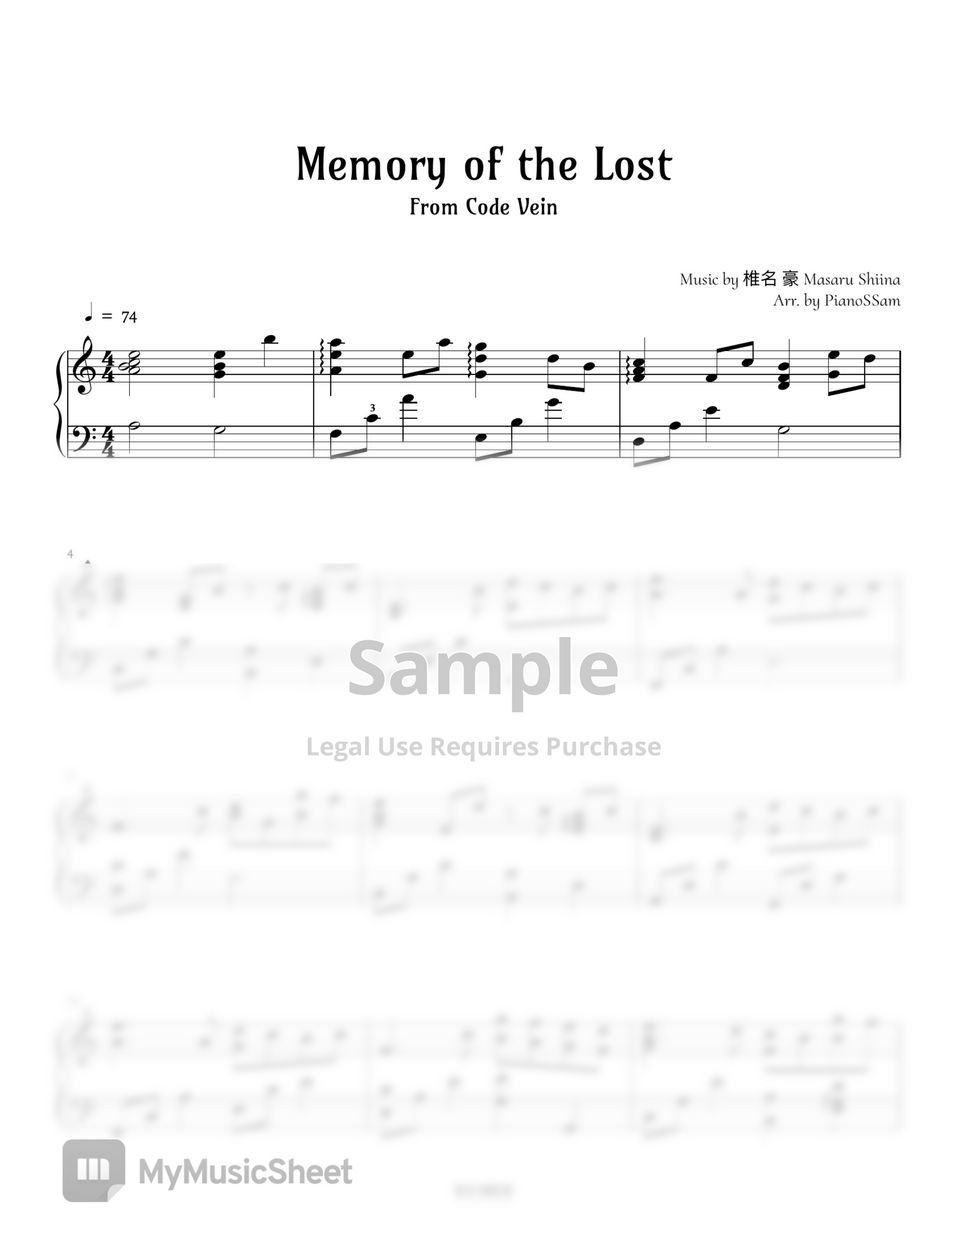 CodeVein - Memory of the Lost by PianoSSam